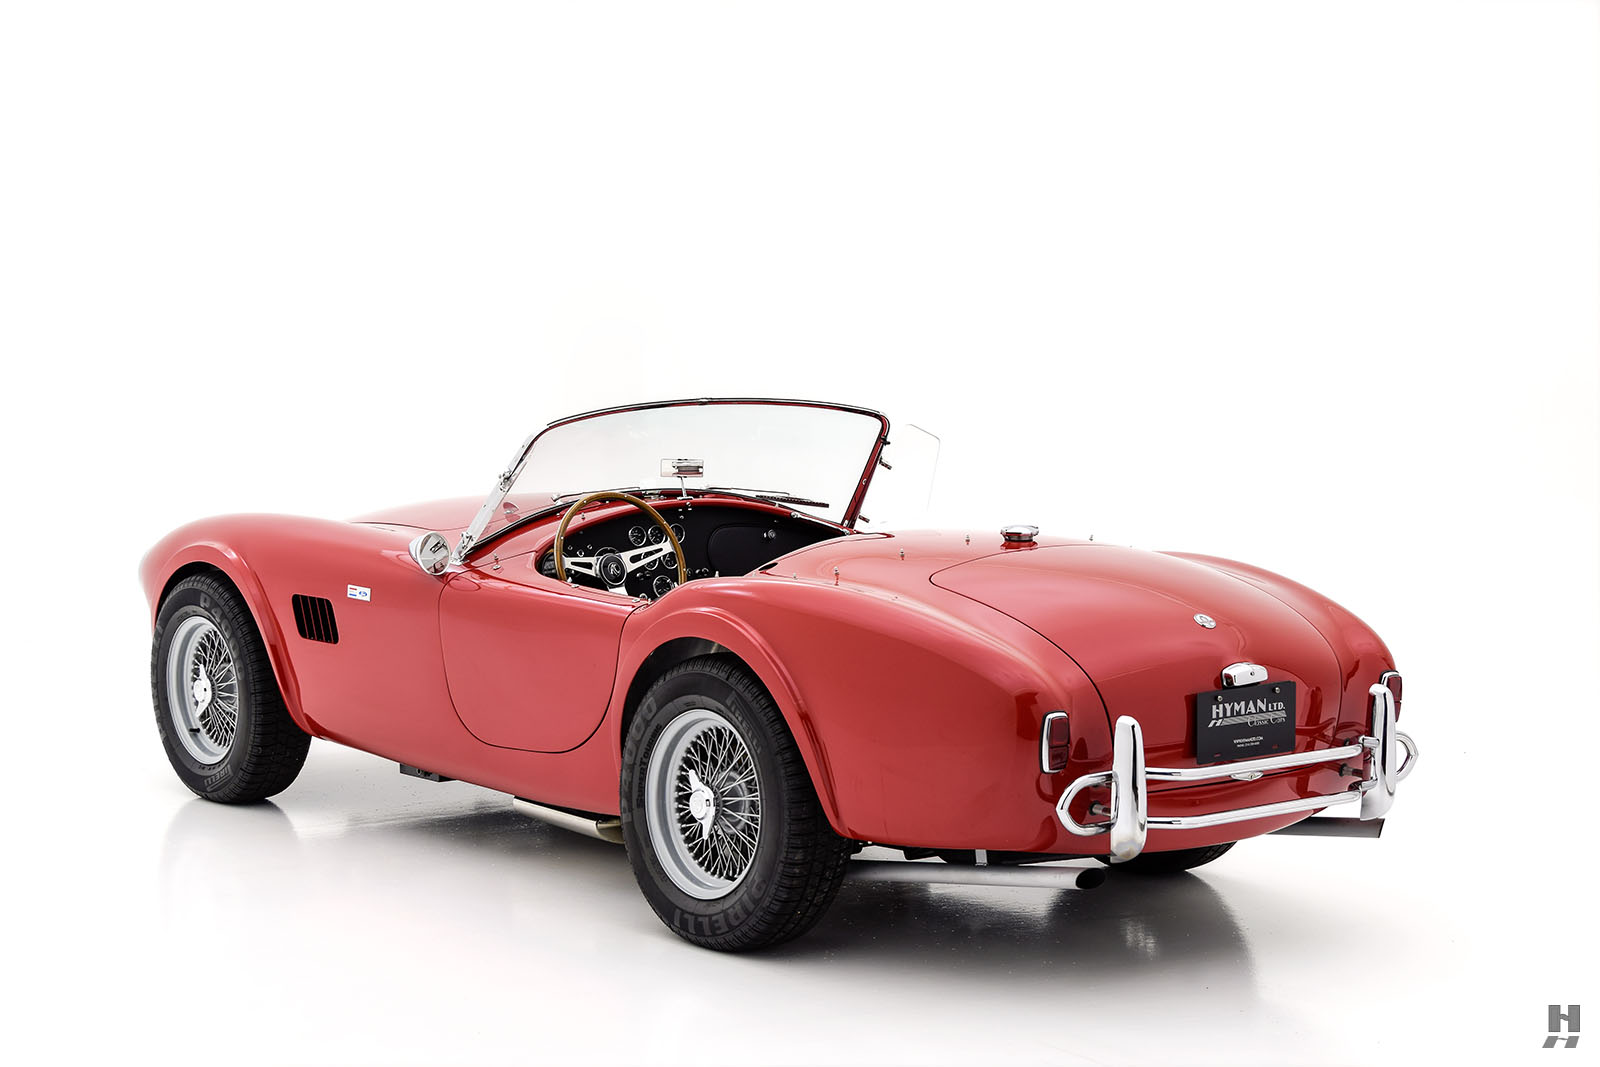 1965 shelby cobra 427 s/c completion